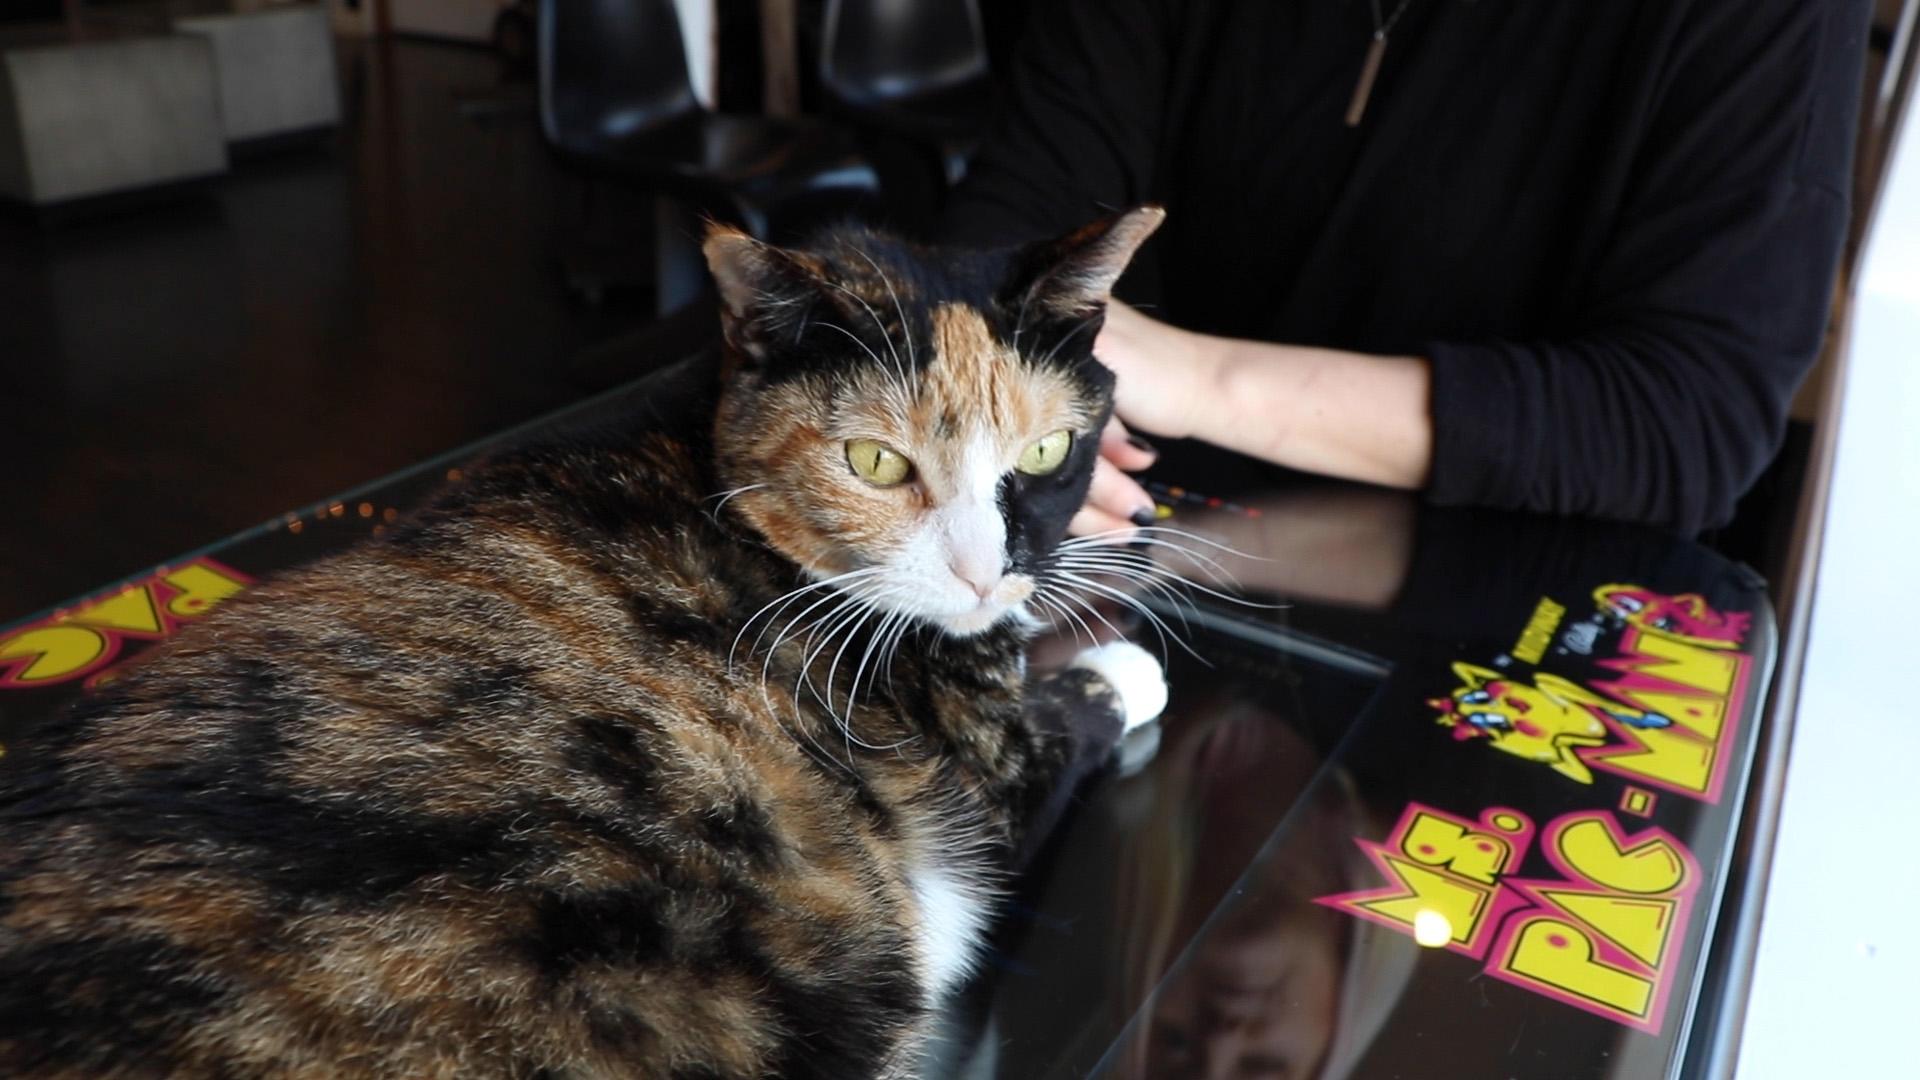 Spring, a cat rescued from the U.S. Virgin Islands, rests on a Ms. Pac Man game at Catcade. (Evan Garcia / WTTW News)